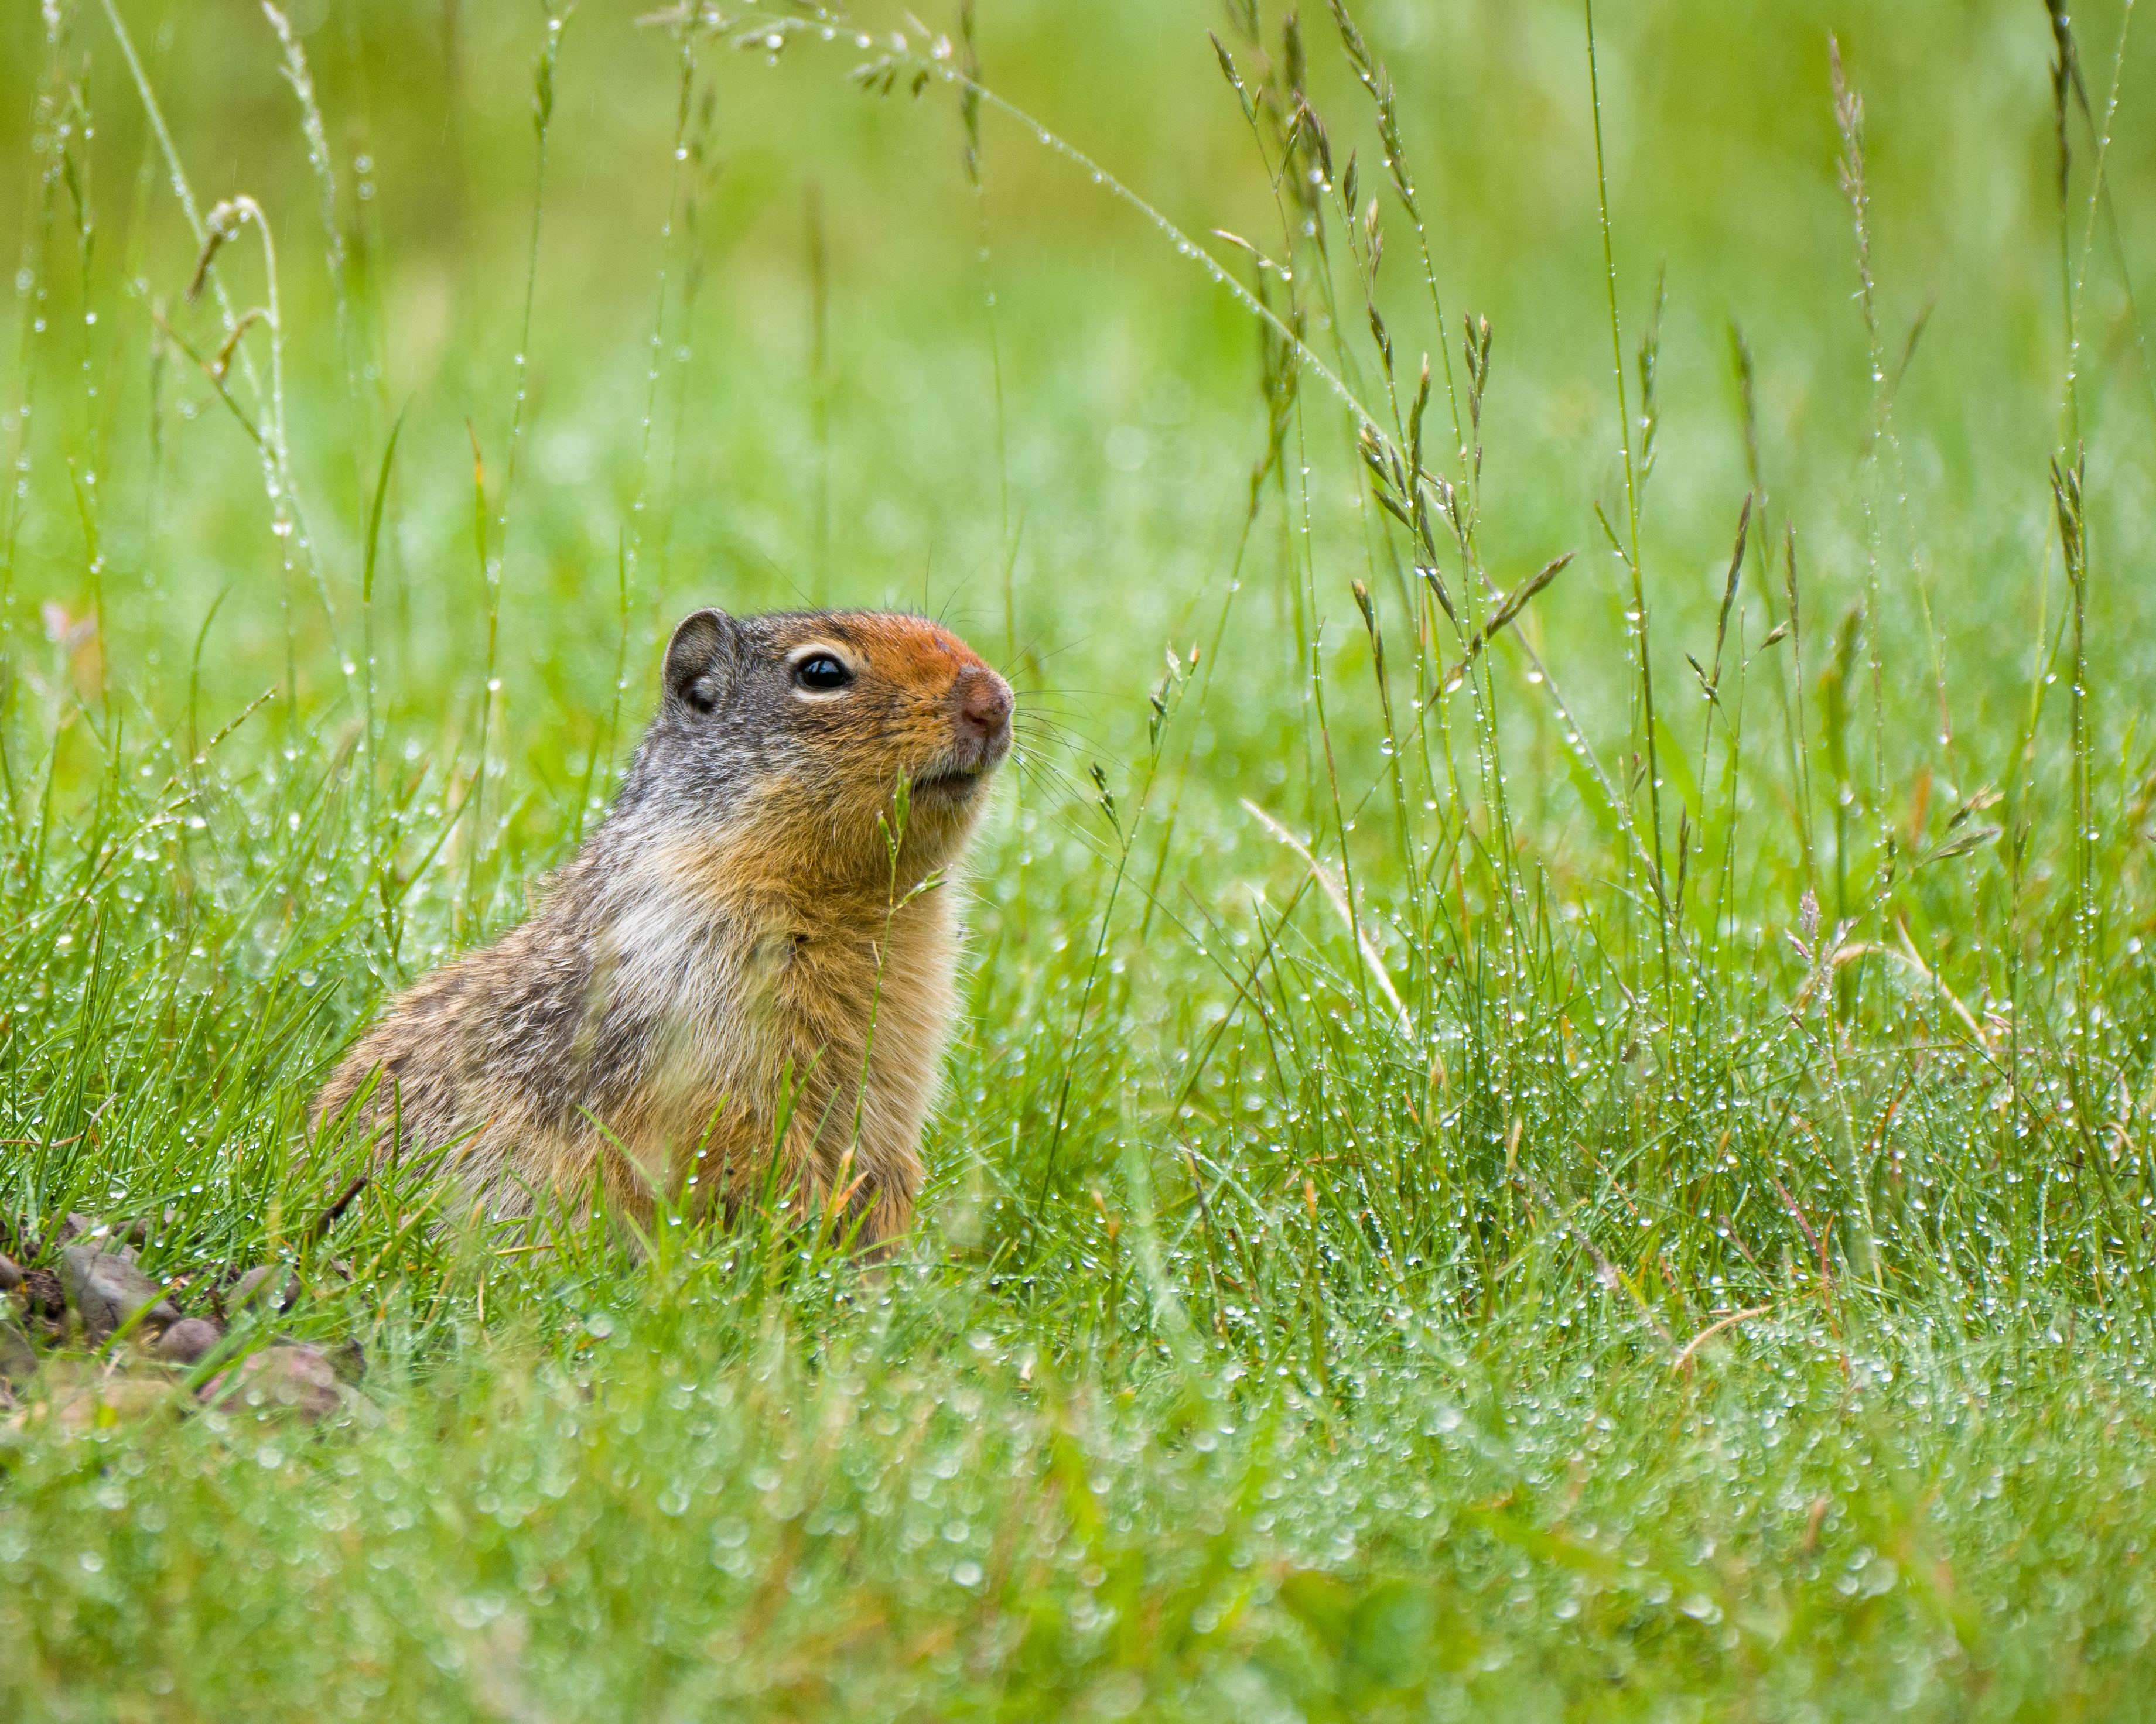 A Columbian ground squirrel | Source: Getty Images